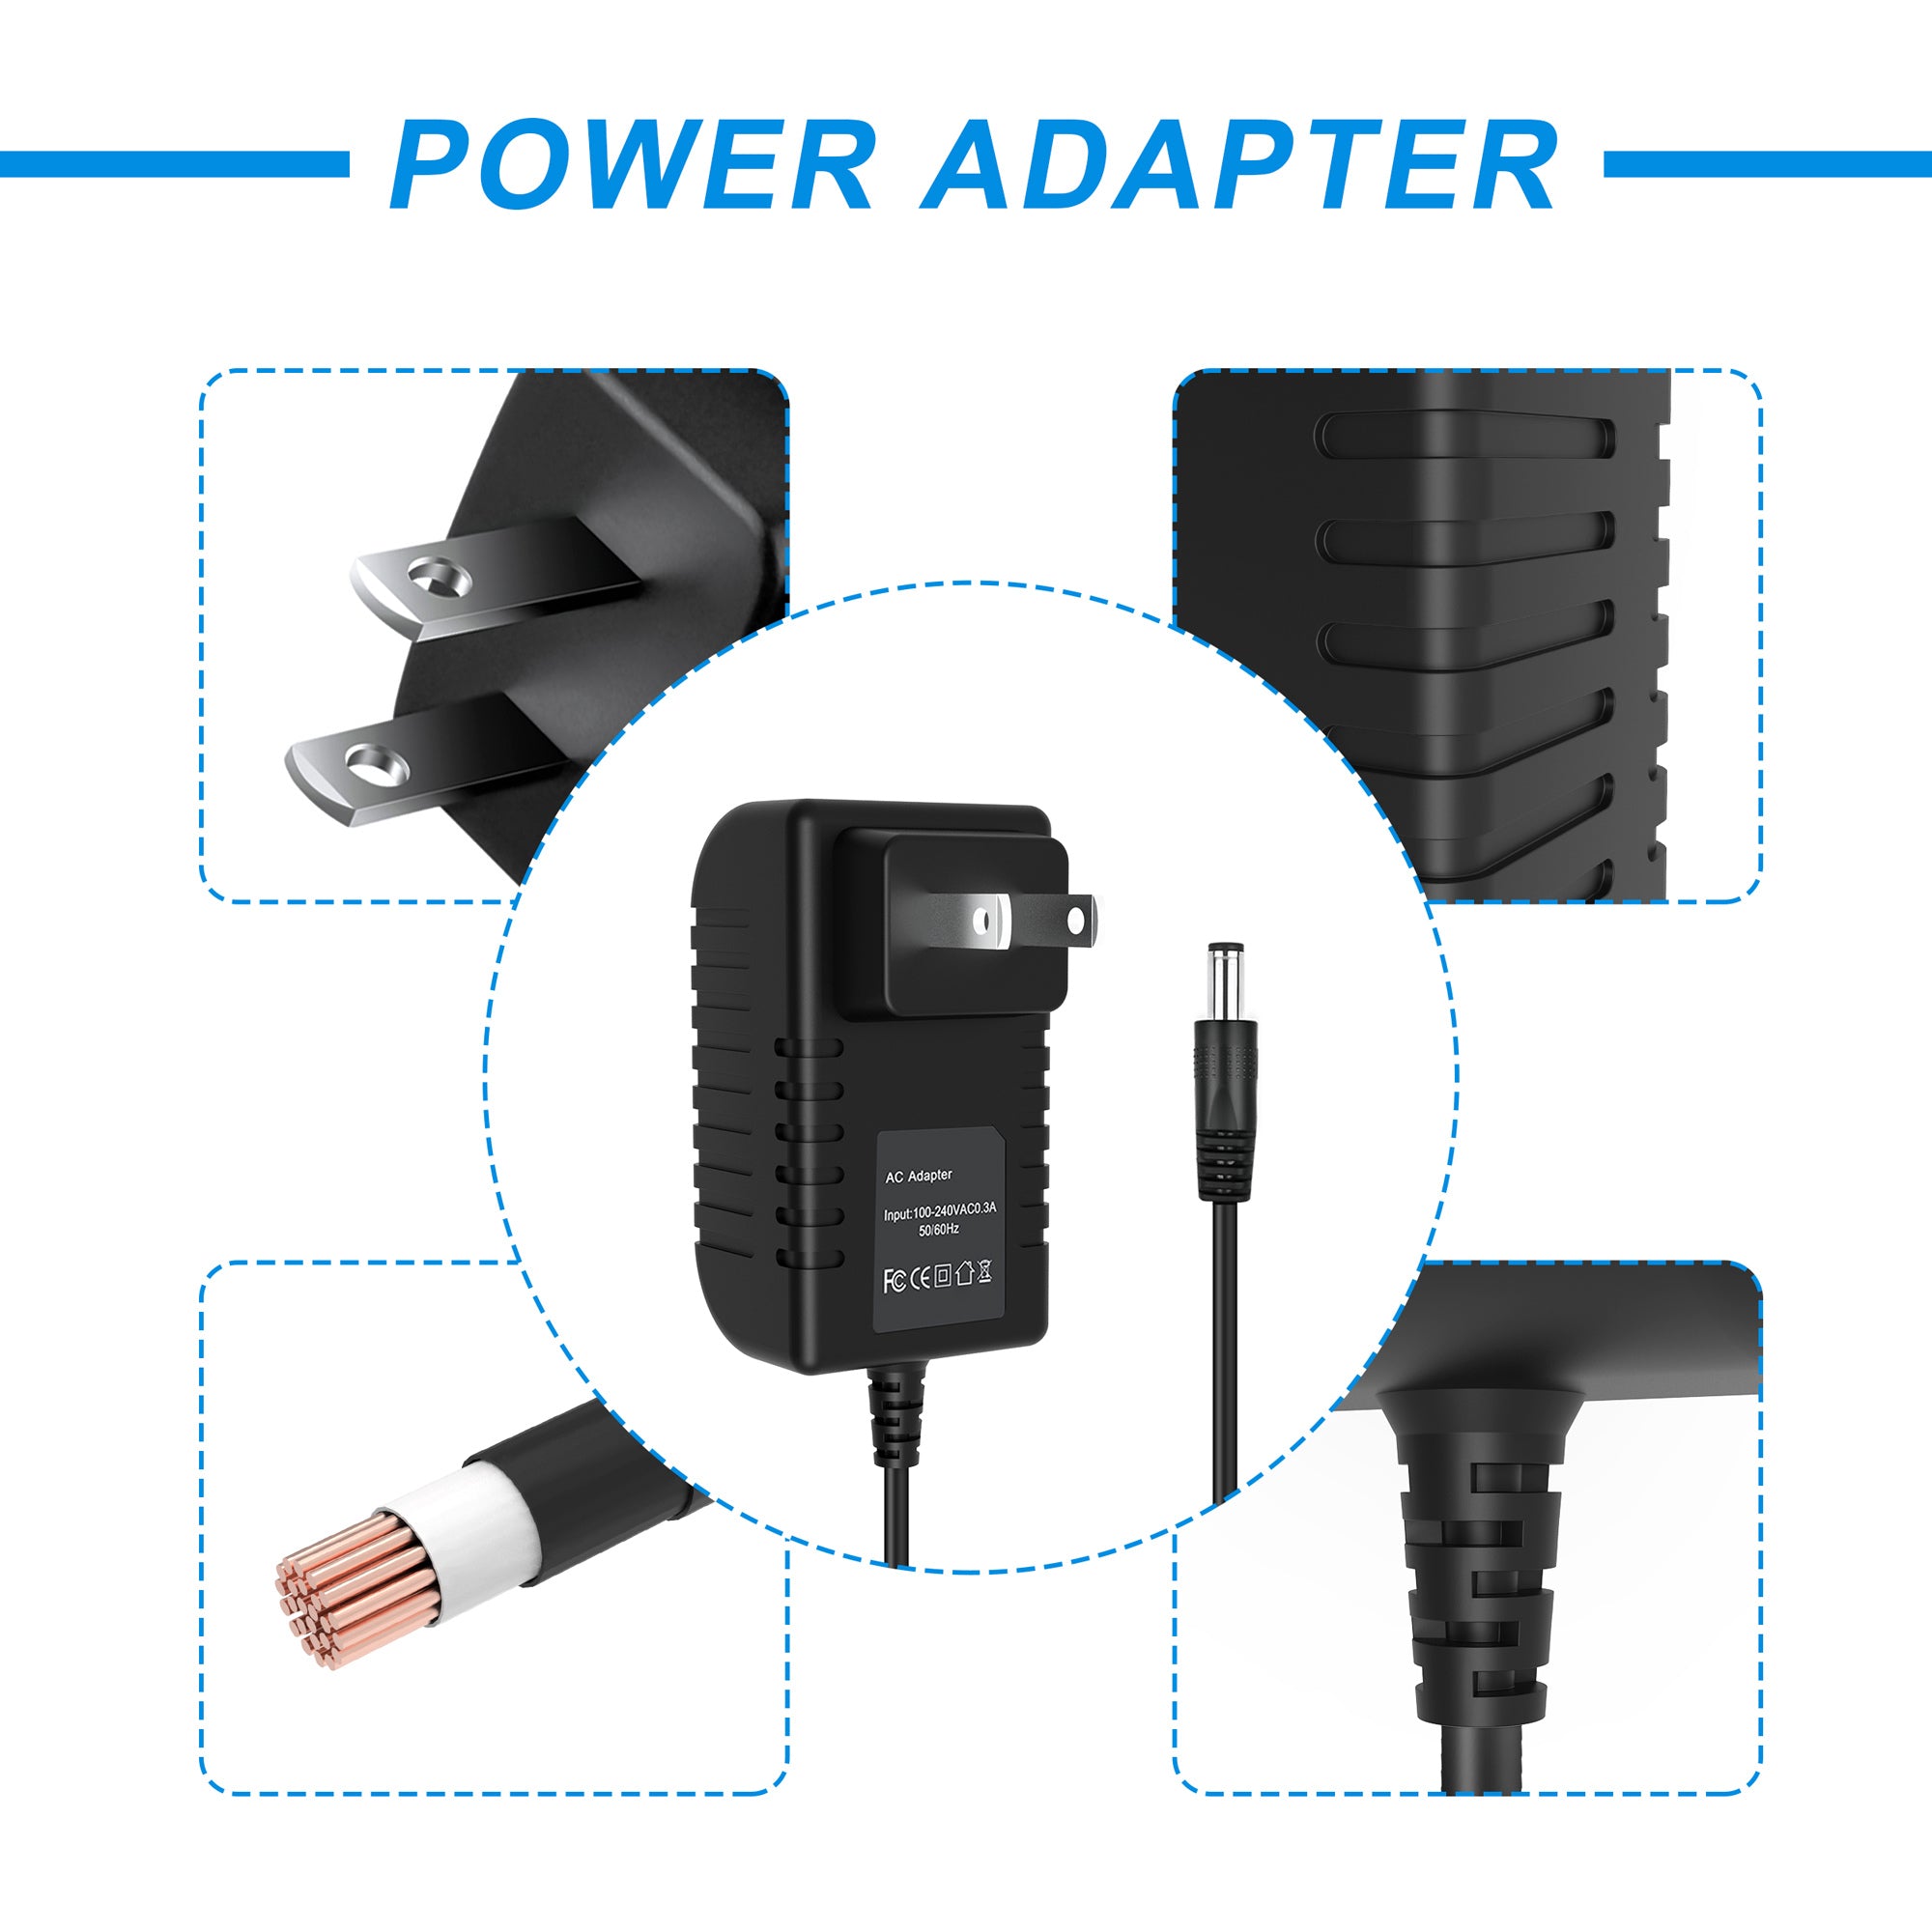 AbleGrid 12V AC Charger Adapter Compatible with WD My Book Live WDBACG Hard Drive Power Supply